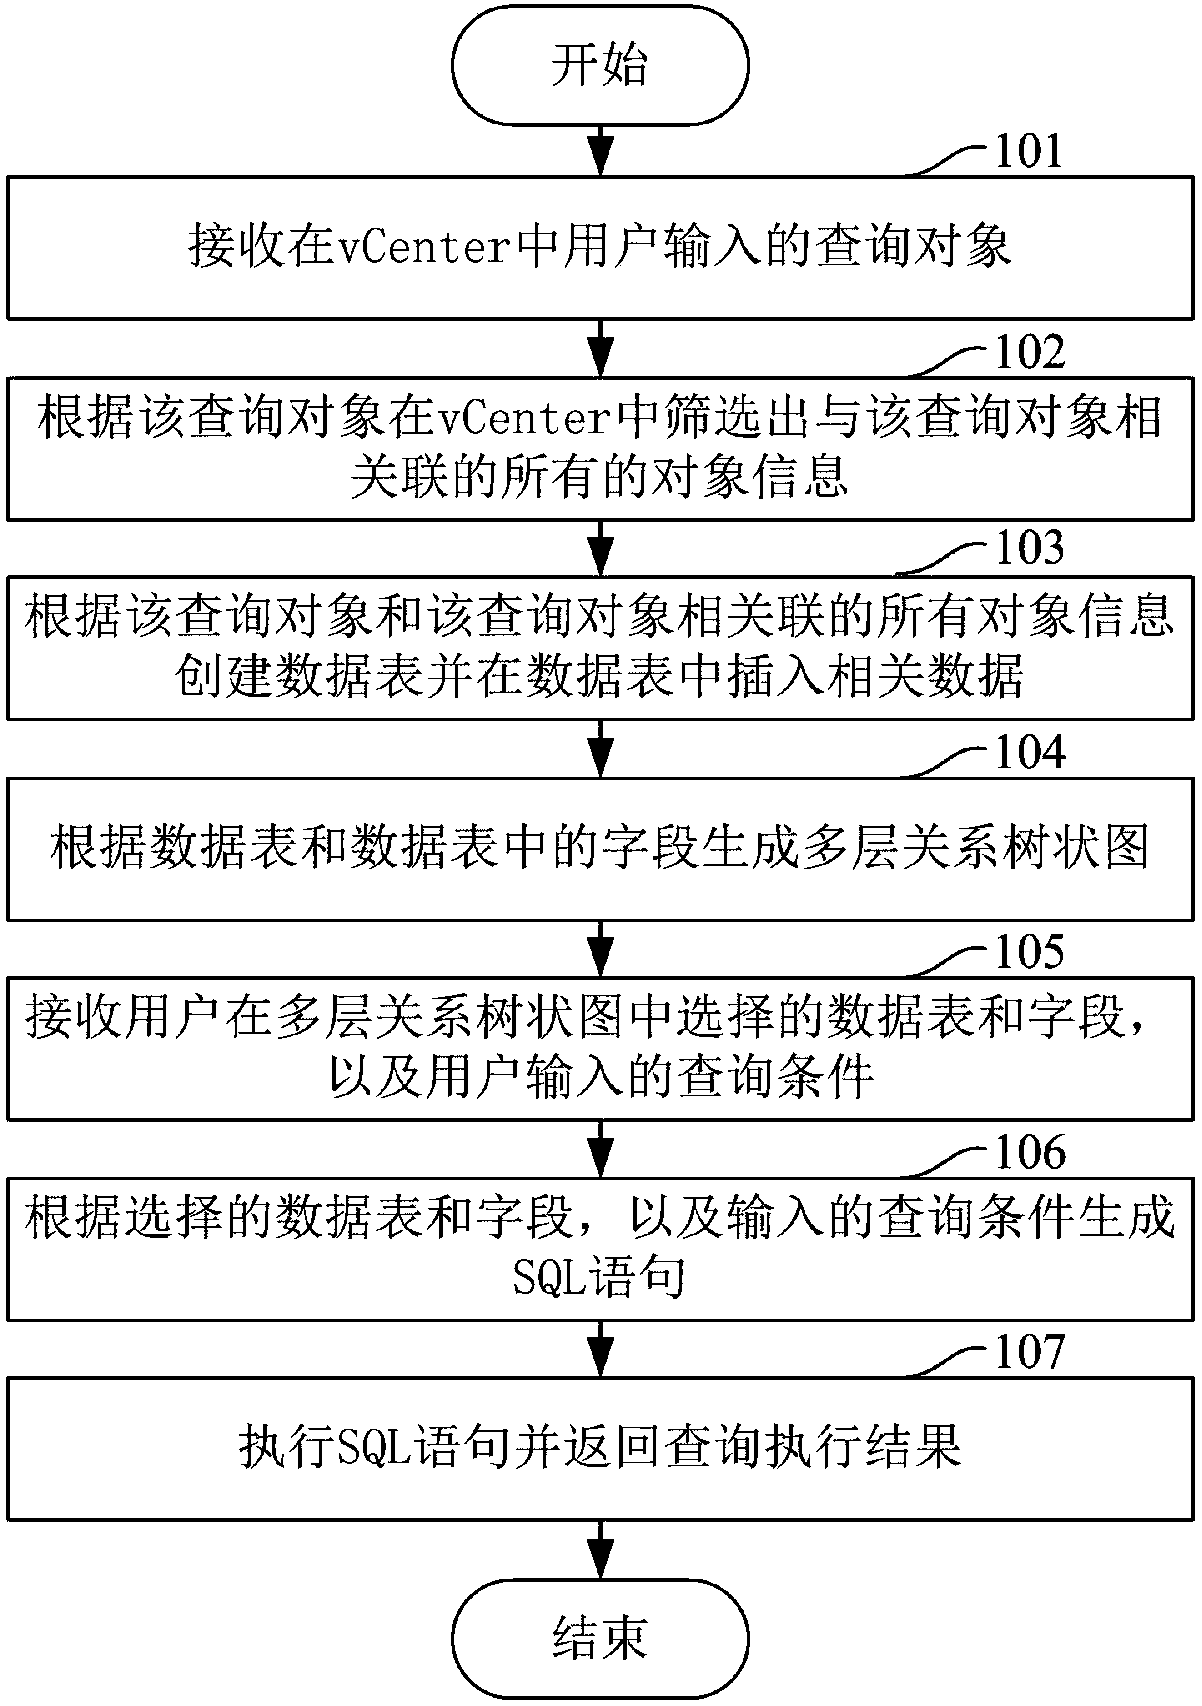 Associated information querying method, terminal and equipment